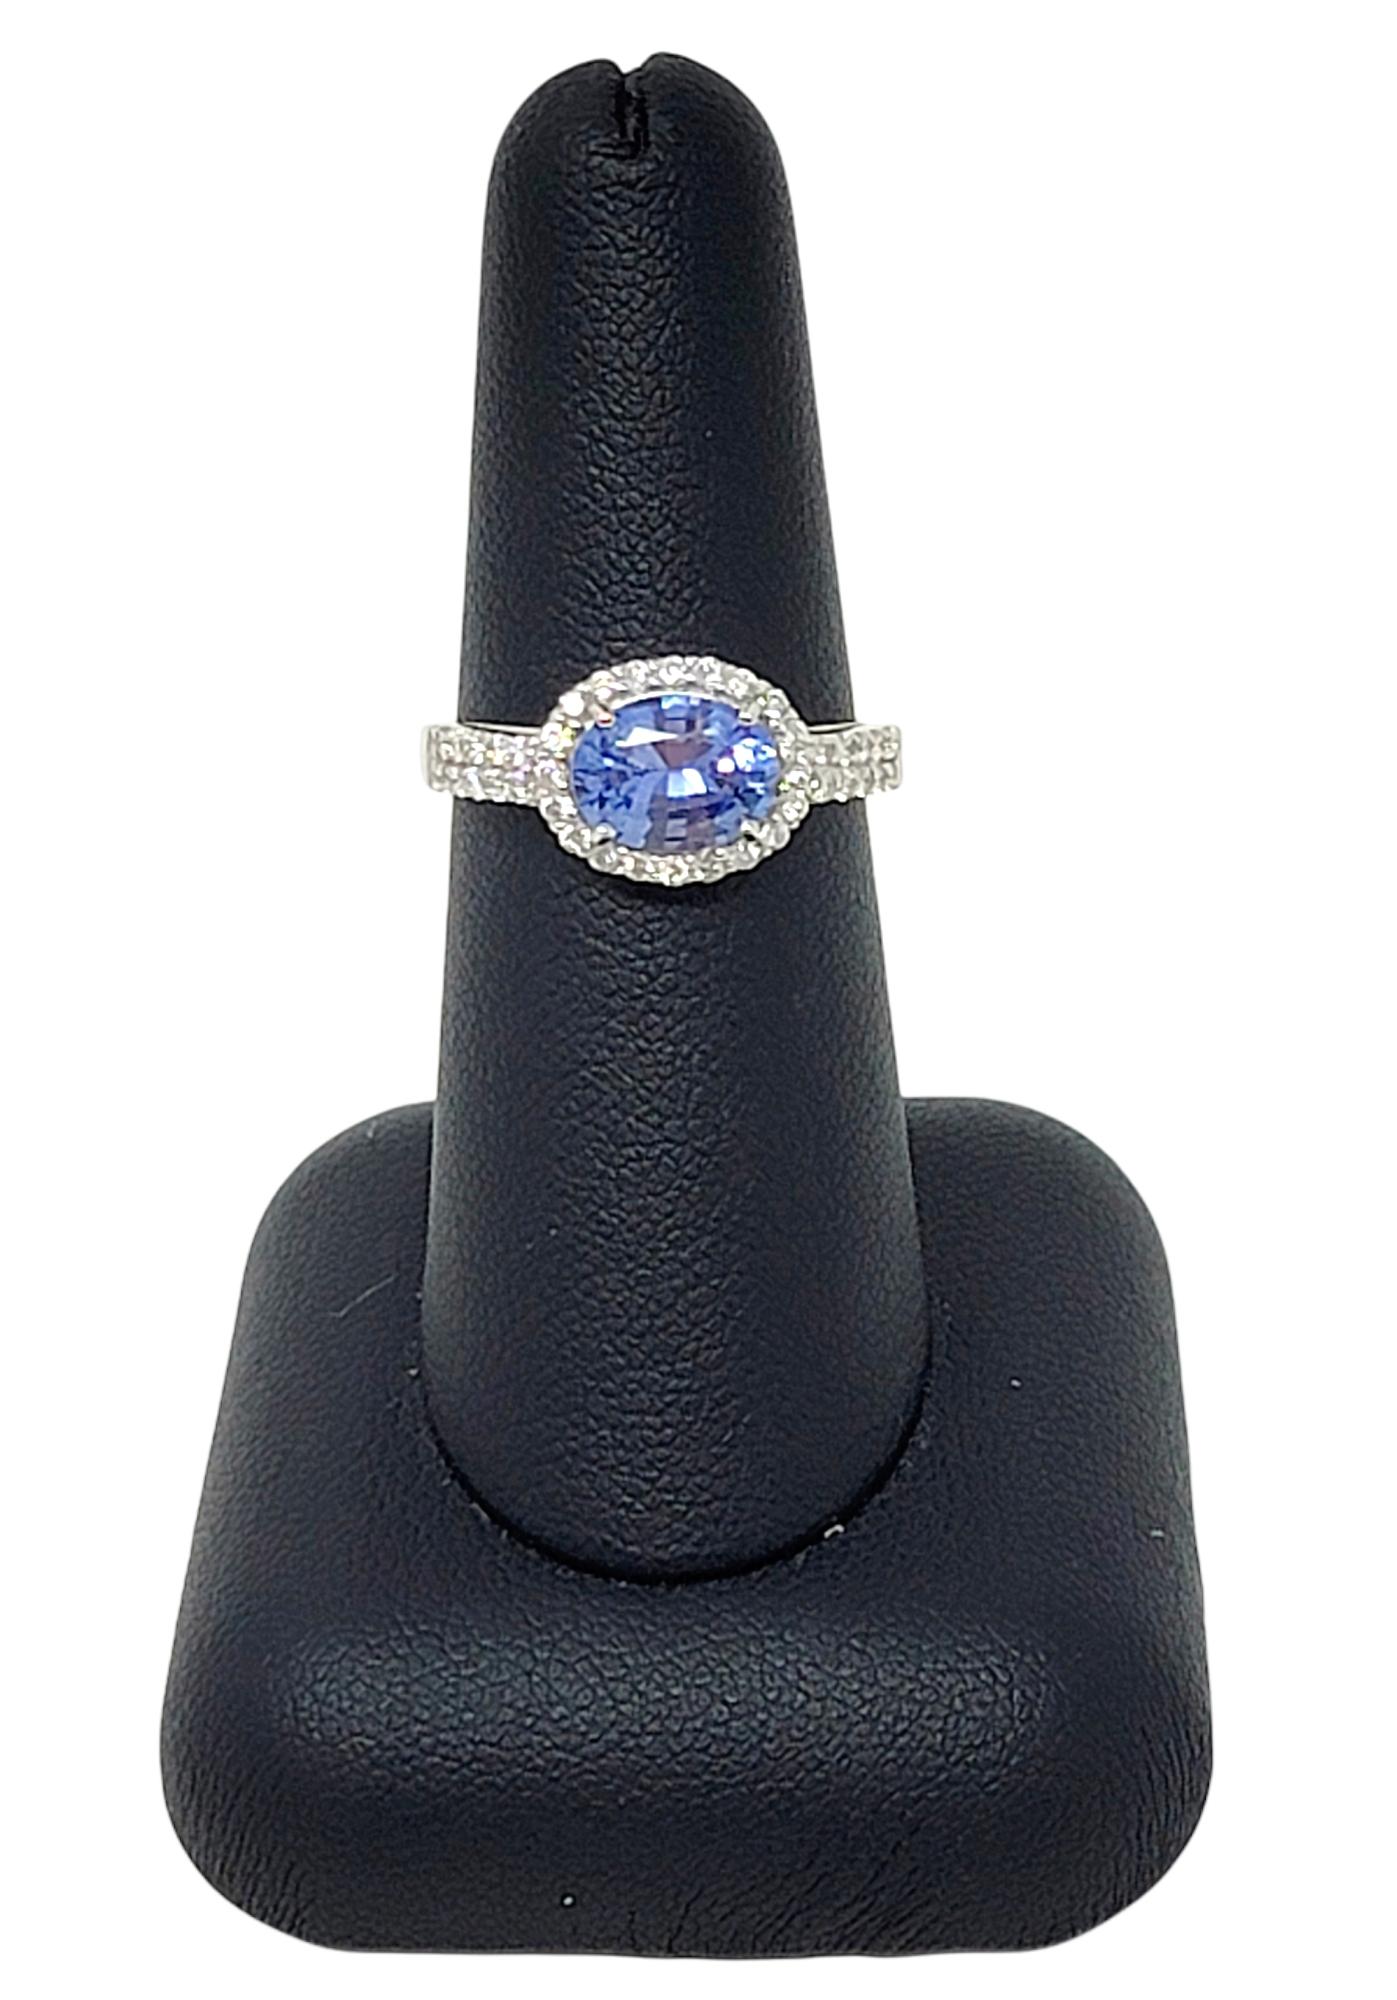 2.02 Carat Total Oval Ceylon Sapphire and Diamond Band Ring 18 Karat White Gold For Sale 4